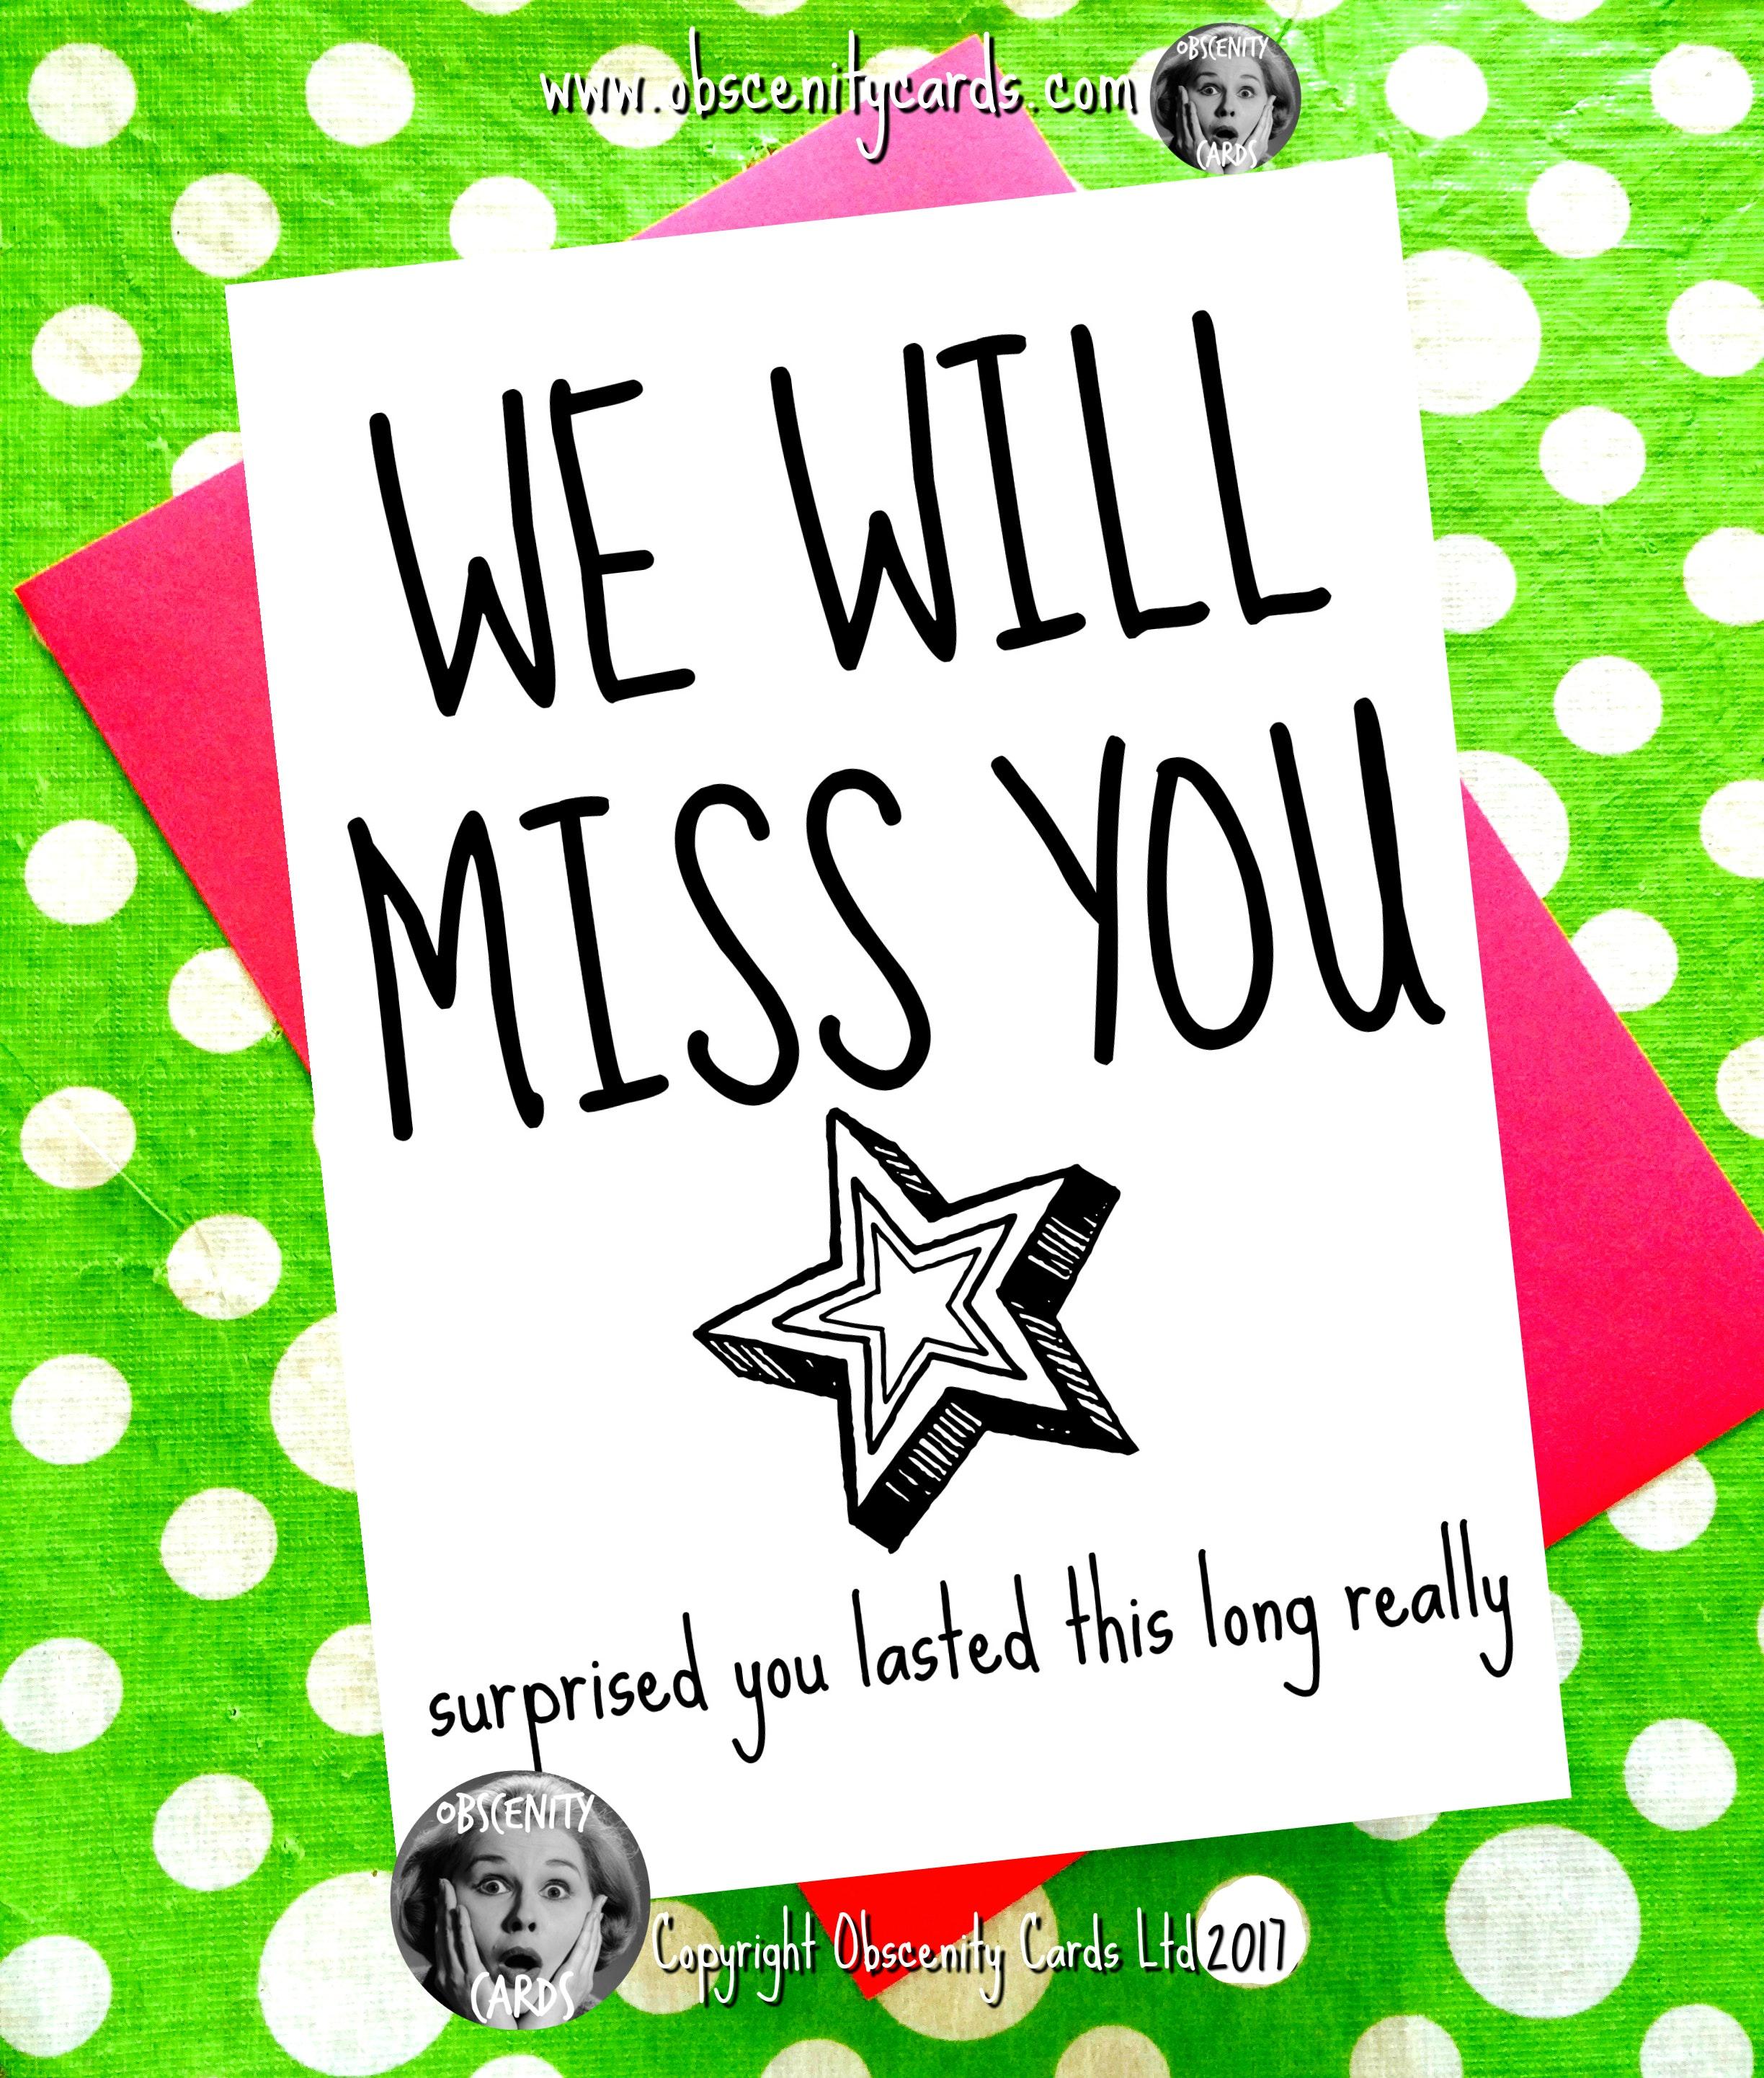 we-will-miss-you-card-leaving-card